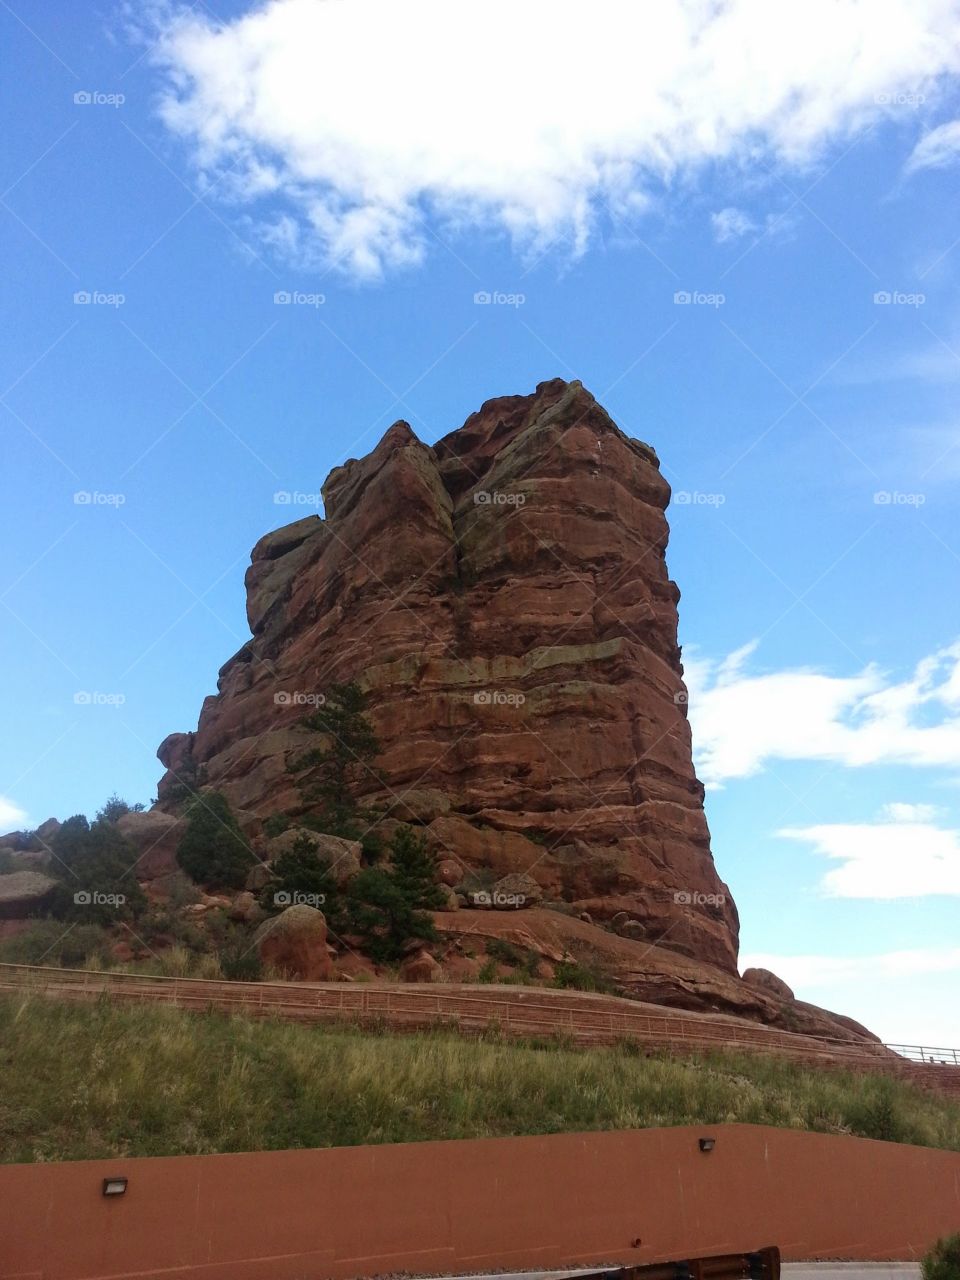 No Person, Travel, Sky, Outdoors, Sandstone